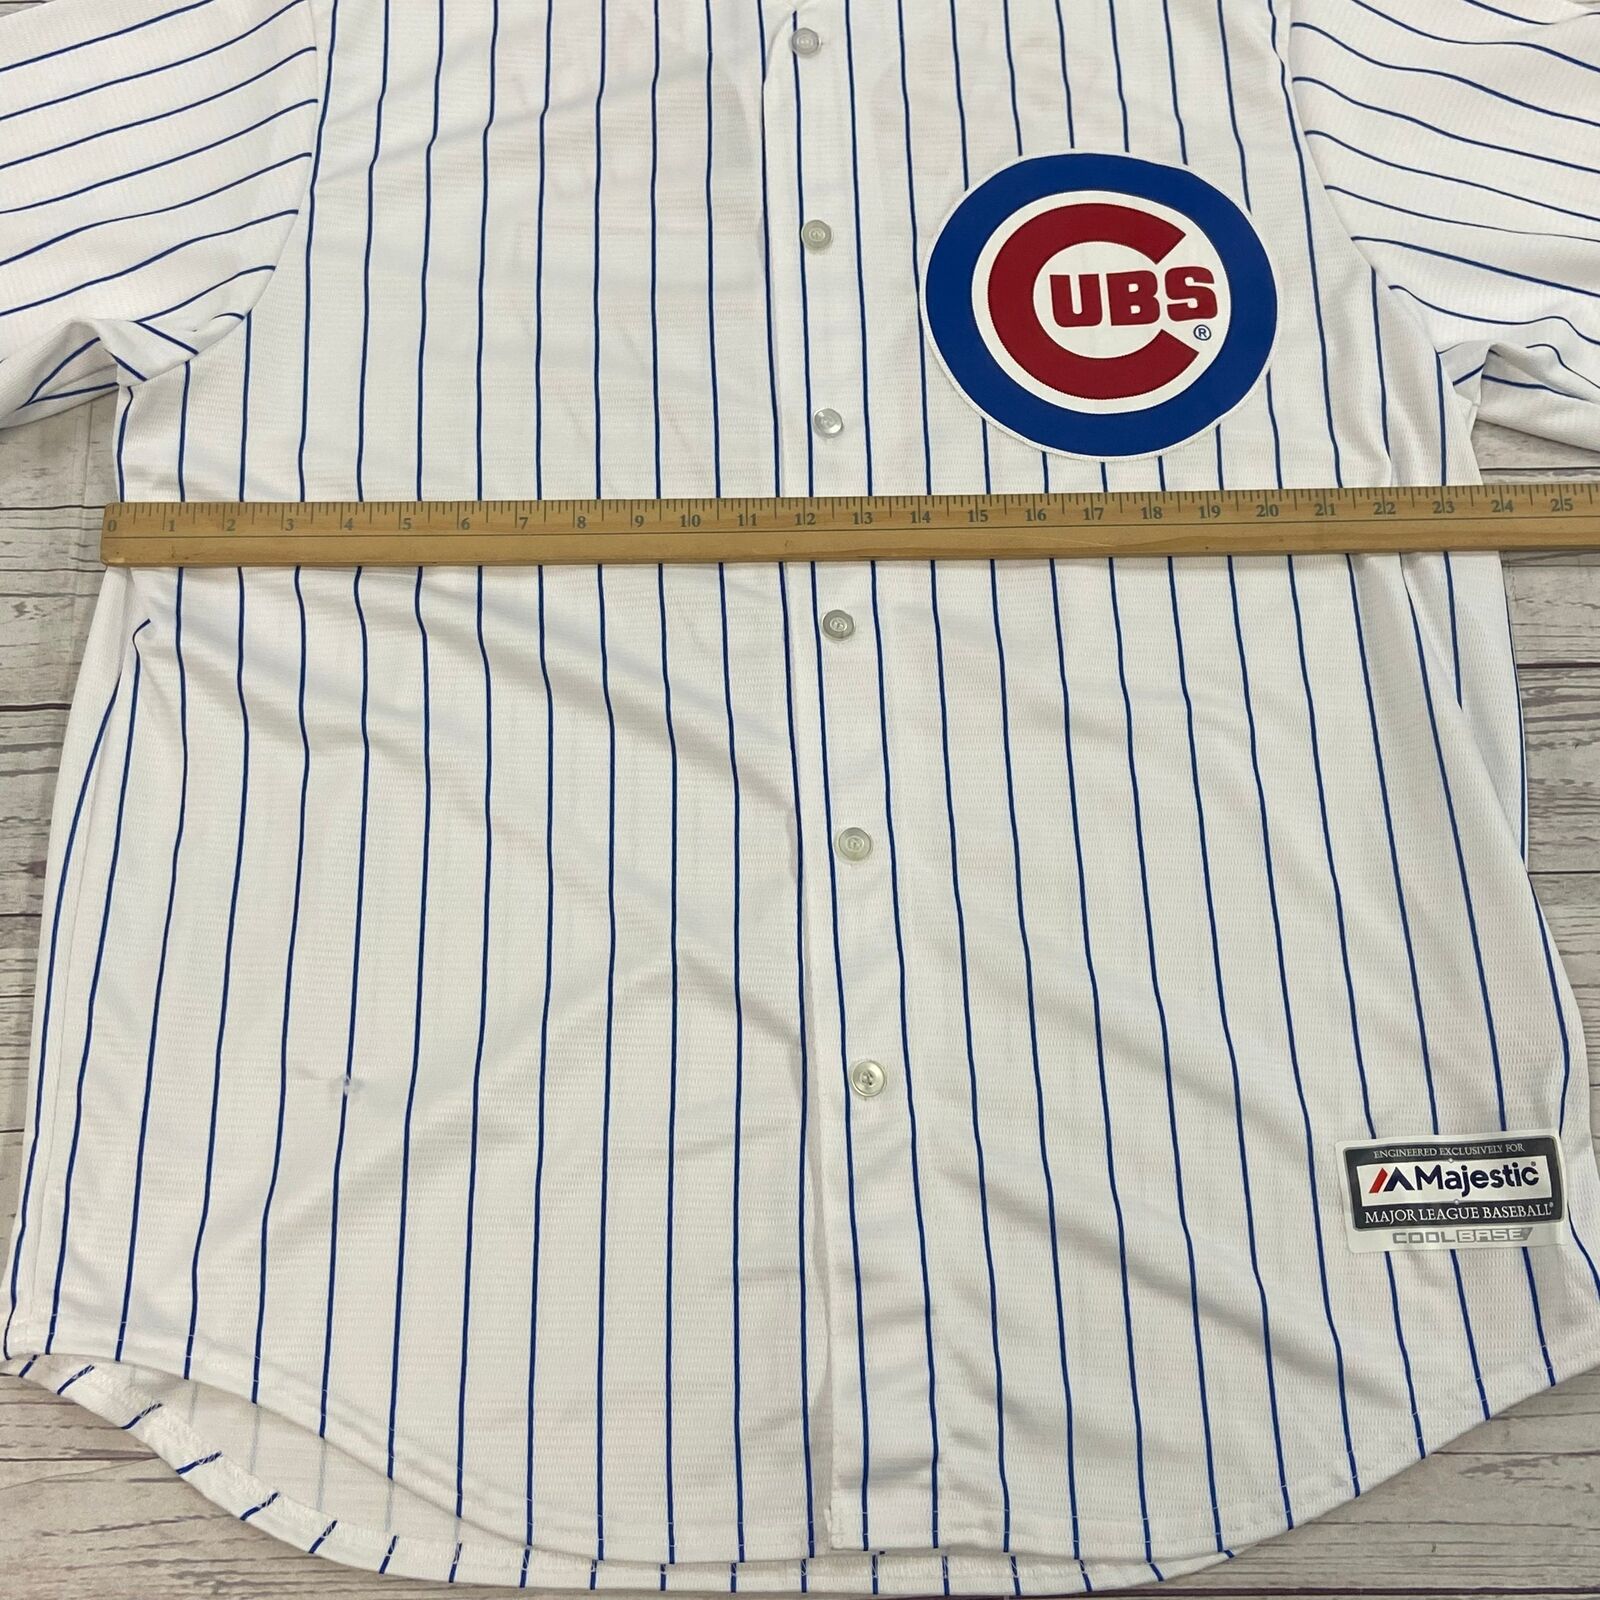 Chicago Cubs Bryant Majestic Jersey,Flag,Hat - clothing